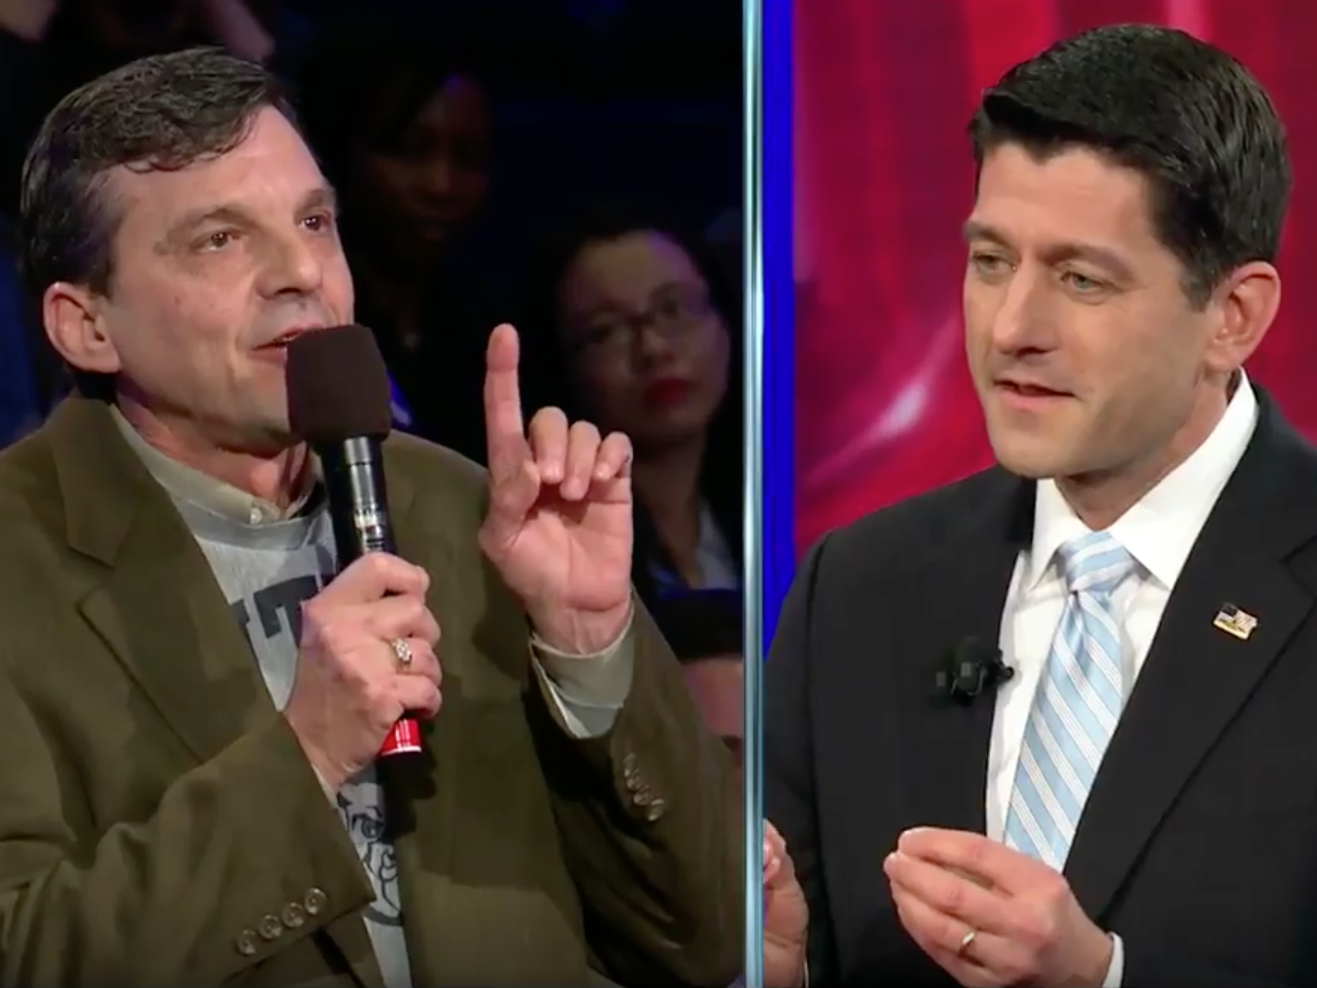 Man who says he 'would be dead' without Obamacare confronts Paul Ryan on the law's repeal - Business Insider